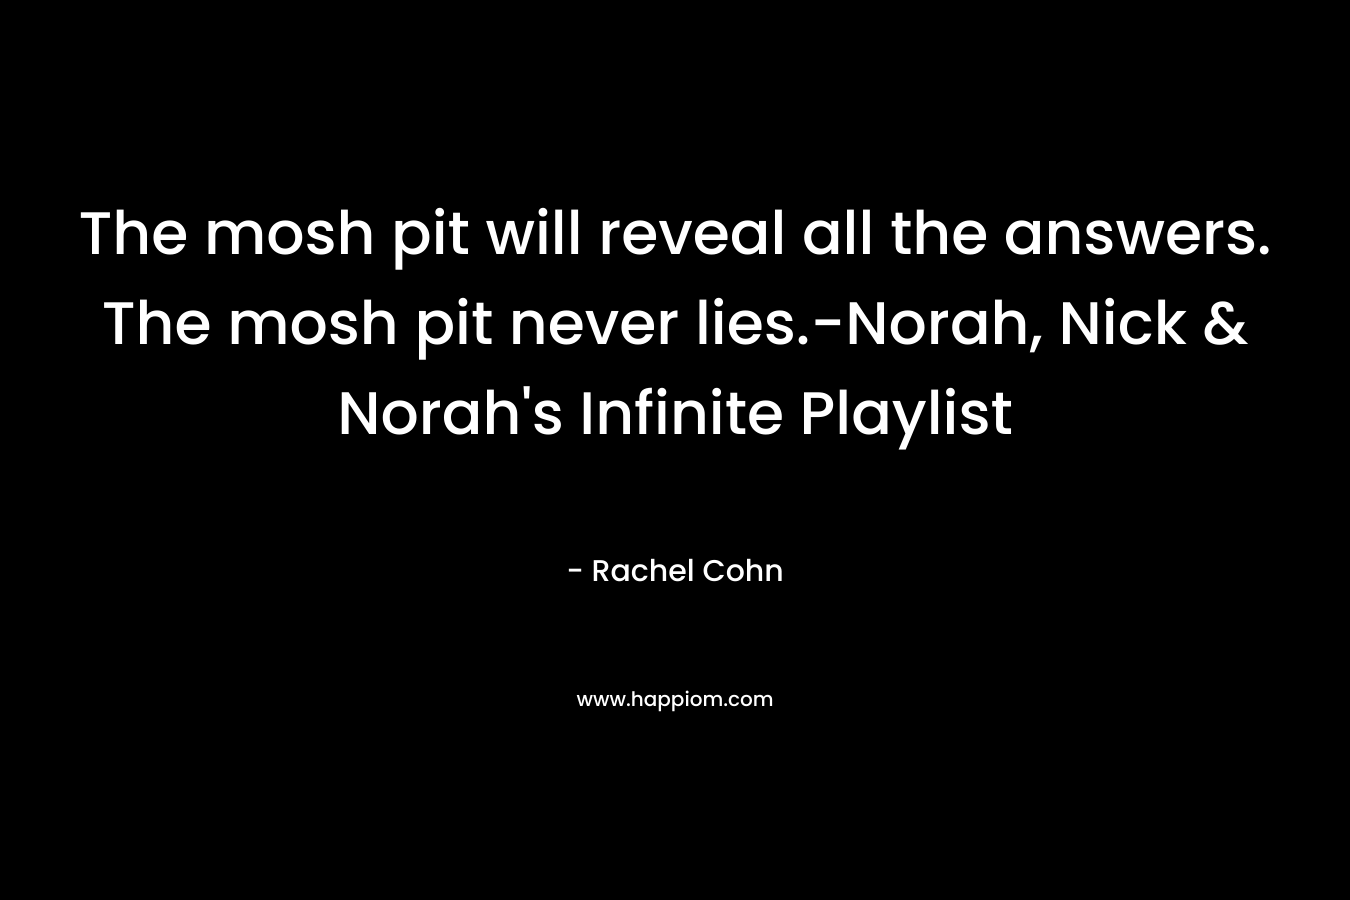 The mosh pit will reveal all the answers. The mosh pit never lies.-Norah, Nick & Norah's Infinite Playlist 